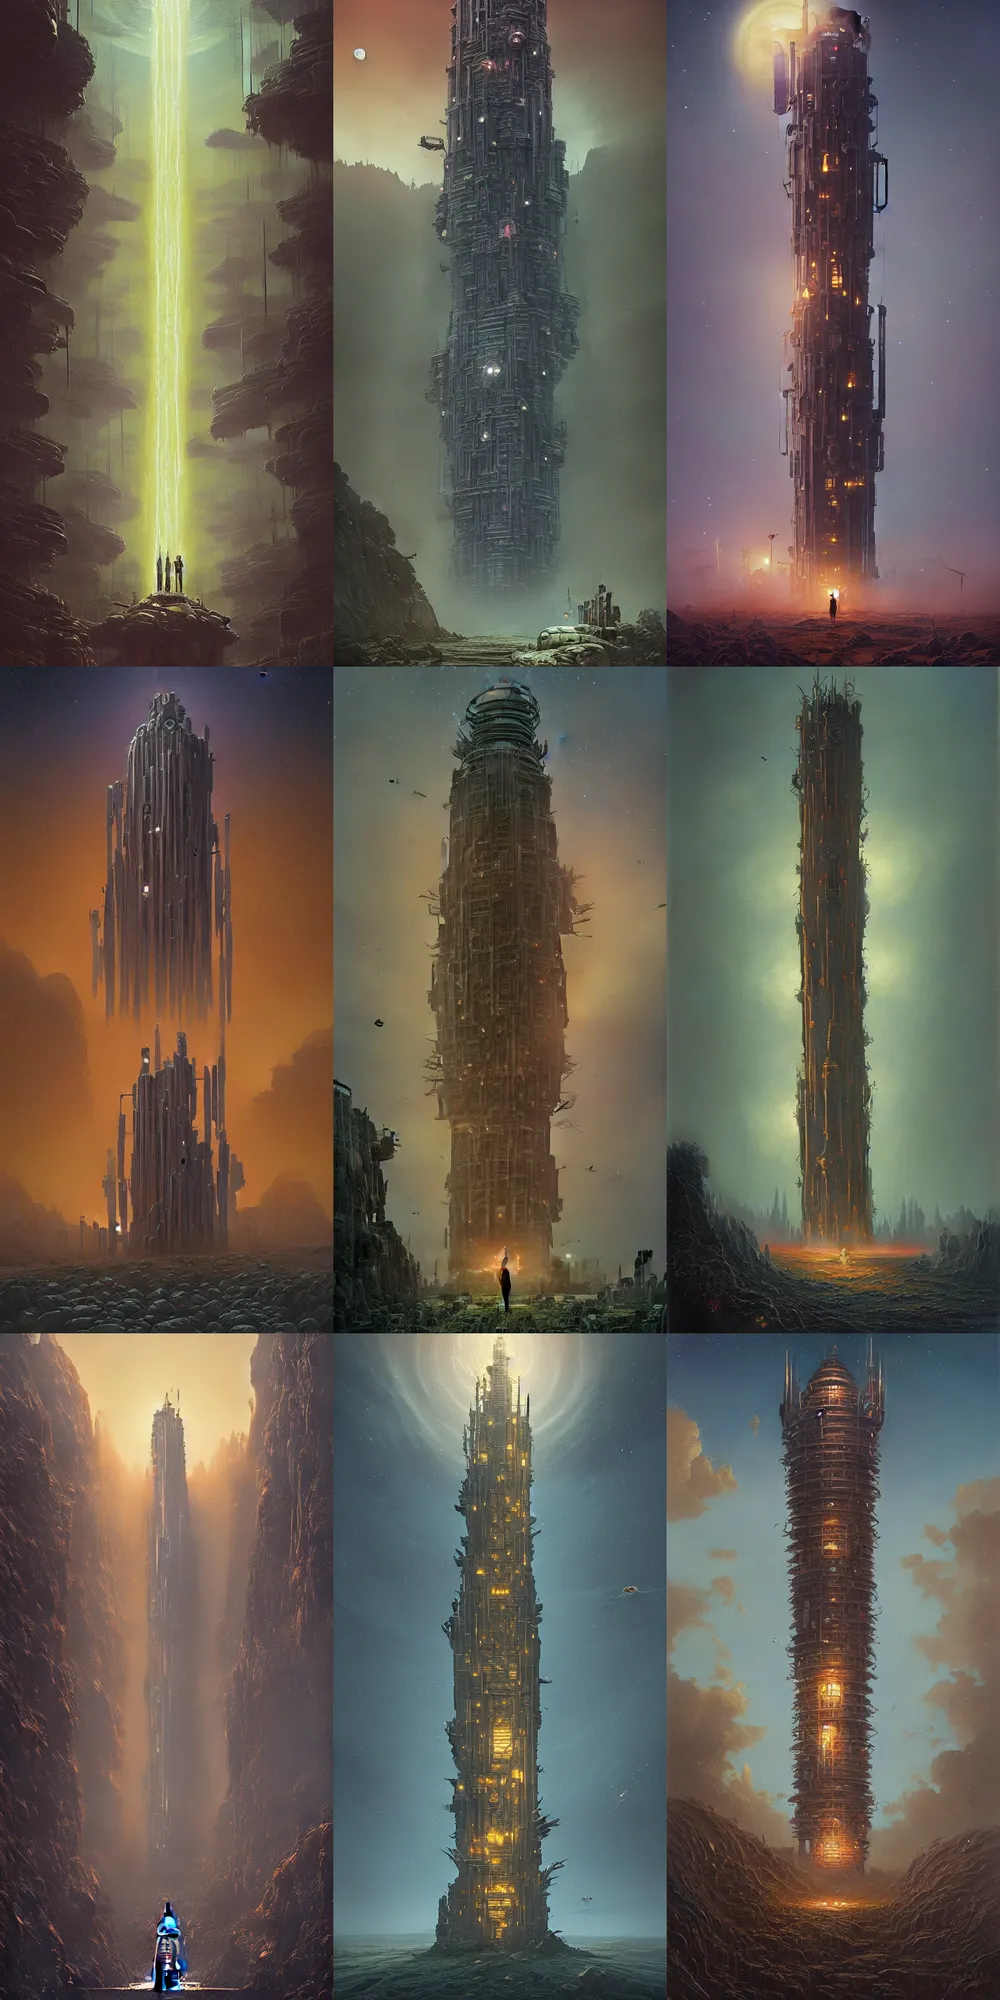 Image similar to beautiful oil painting, beautiful oil painting, beautiful oil painting, amazing unique highly detailed dark sci-fi retro cover art of the Impossible Tower by James Gurney and Greg Rutkowski and Simon Stalenhag, amazing unique highly detailed dark sci-fi retro cover art of the Impossible Tower by James Gurney and Greg Rutkowski and Simon Stalenhag, composition and color palette by Simon Stalenhag, composition and color palette by Simon Stalenhag, composition and color palette by Simon Stalenhag, composition and color palette by Simon Stalenhag, sci-fi inspiration from Jim Burns and Bruce Pennington, sci-fi inspiration from Jim Burns and Bruce Pennington, behold the great universe machine, atmospheric lighting, epic scale, dynamic angle, cinematic composition, sense of awe, sense of awe, wonder, anthropomorphic machine, anthropomorphic machine, luminous black hole portal, luminous black hole portal, intricate details, sense of perspective, artificial intelligence gods, artificial intelligence gods, destination at the end of a journey, fantasy elements, surrealism, award winning, genius, atmospheric, monumental, iconic, trending on art station